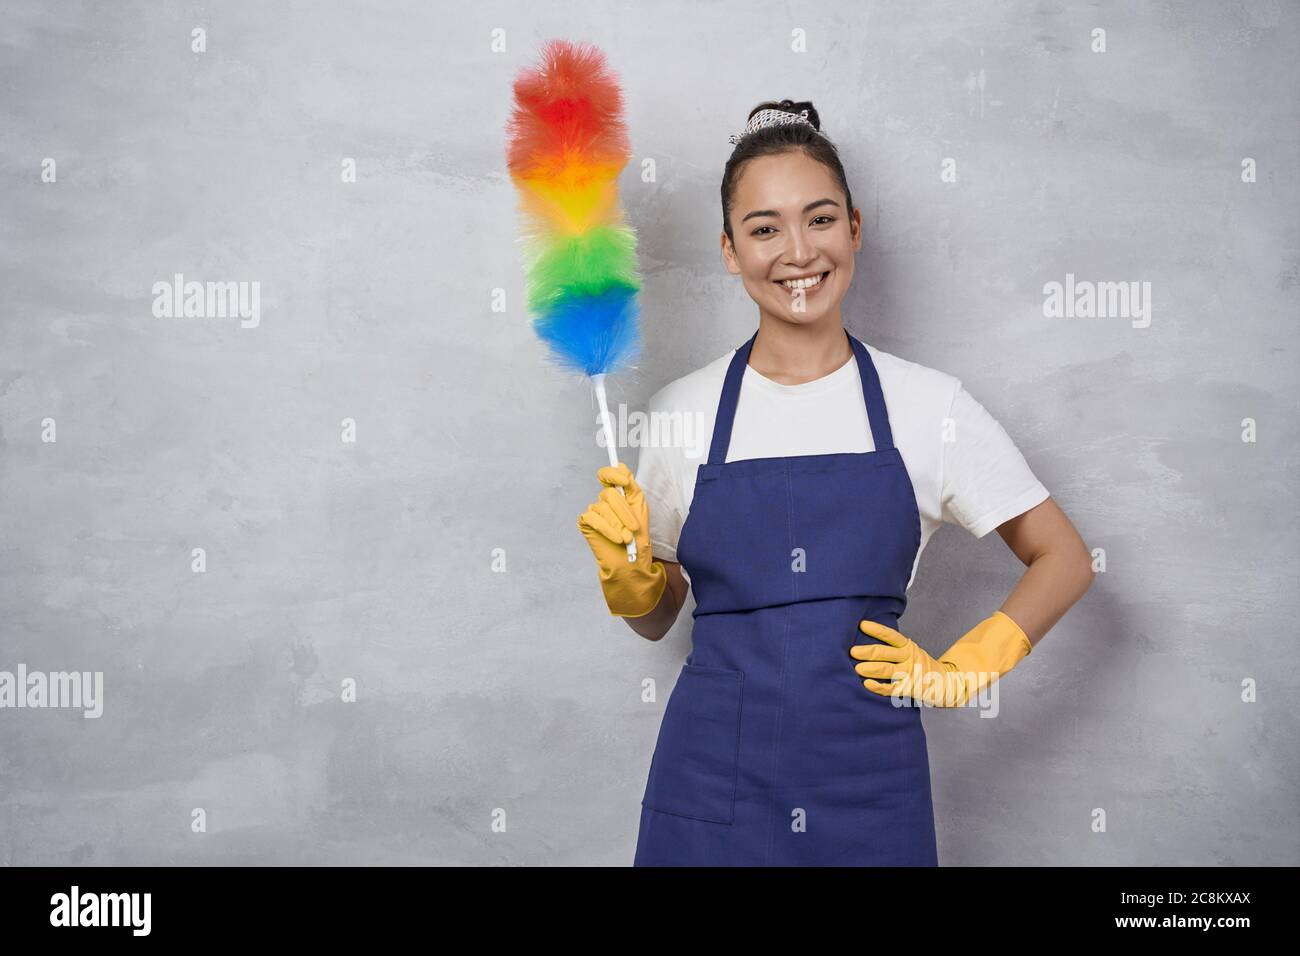 https://c8.alamy.com/comp/2C8KXAX/housekeeping-and-cleaning-service-concept-happy-young-woman-cleaning-lady-in-uniform-holding-colorful-microfiber-duster-and-smiling-at-camera-while-standing-against-grey-wall-2C8KXAX.jpg